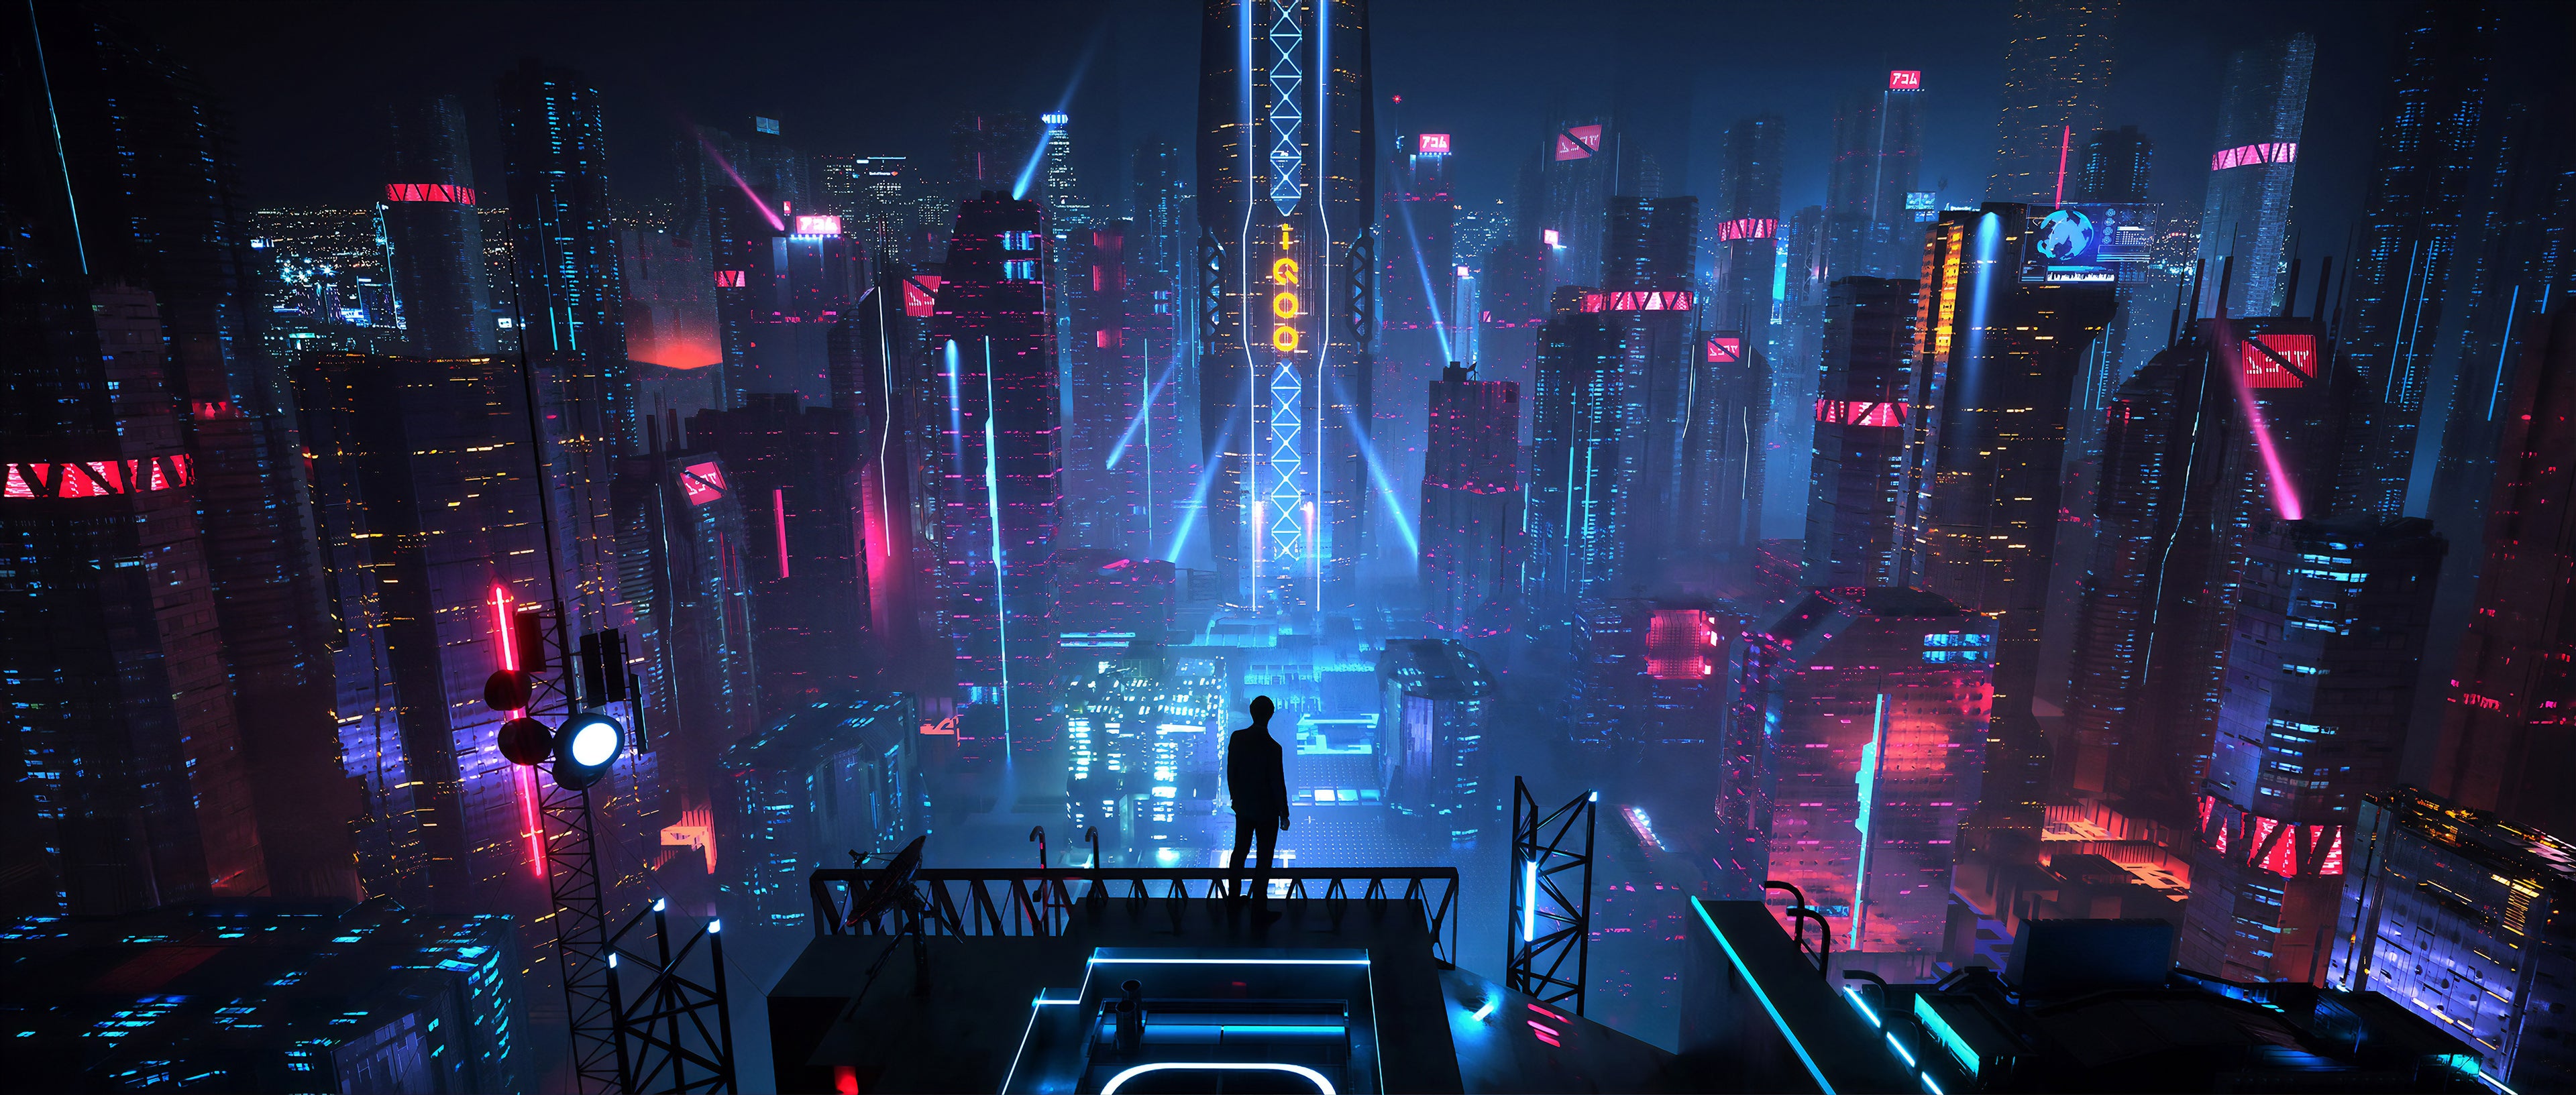 Cyberpunk 4K wallpapers for your desktop or mobile screen free and easy